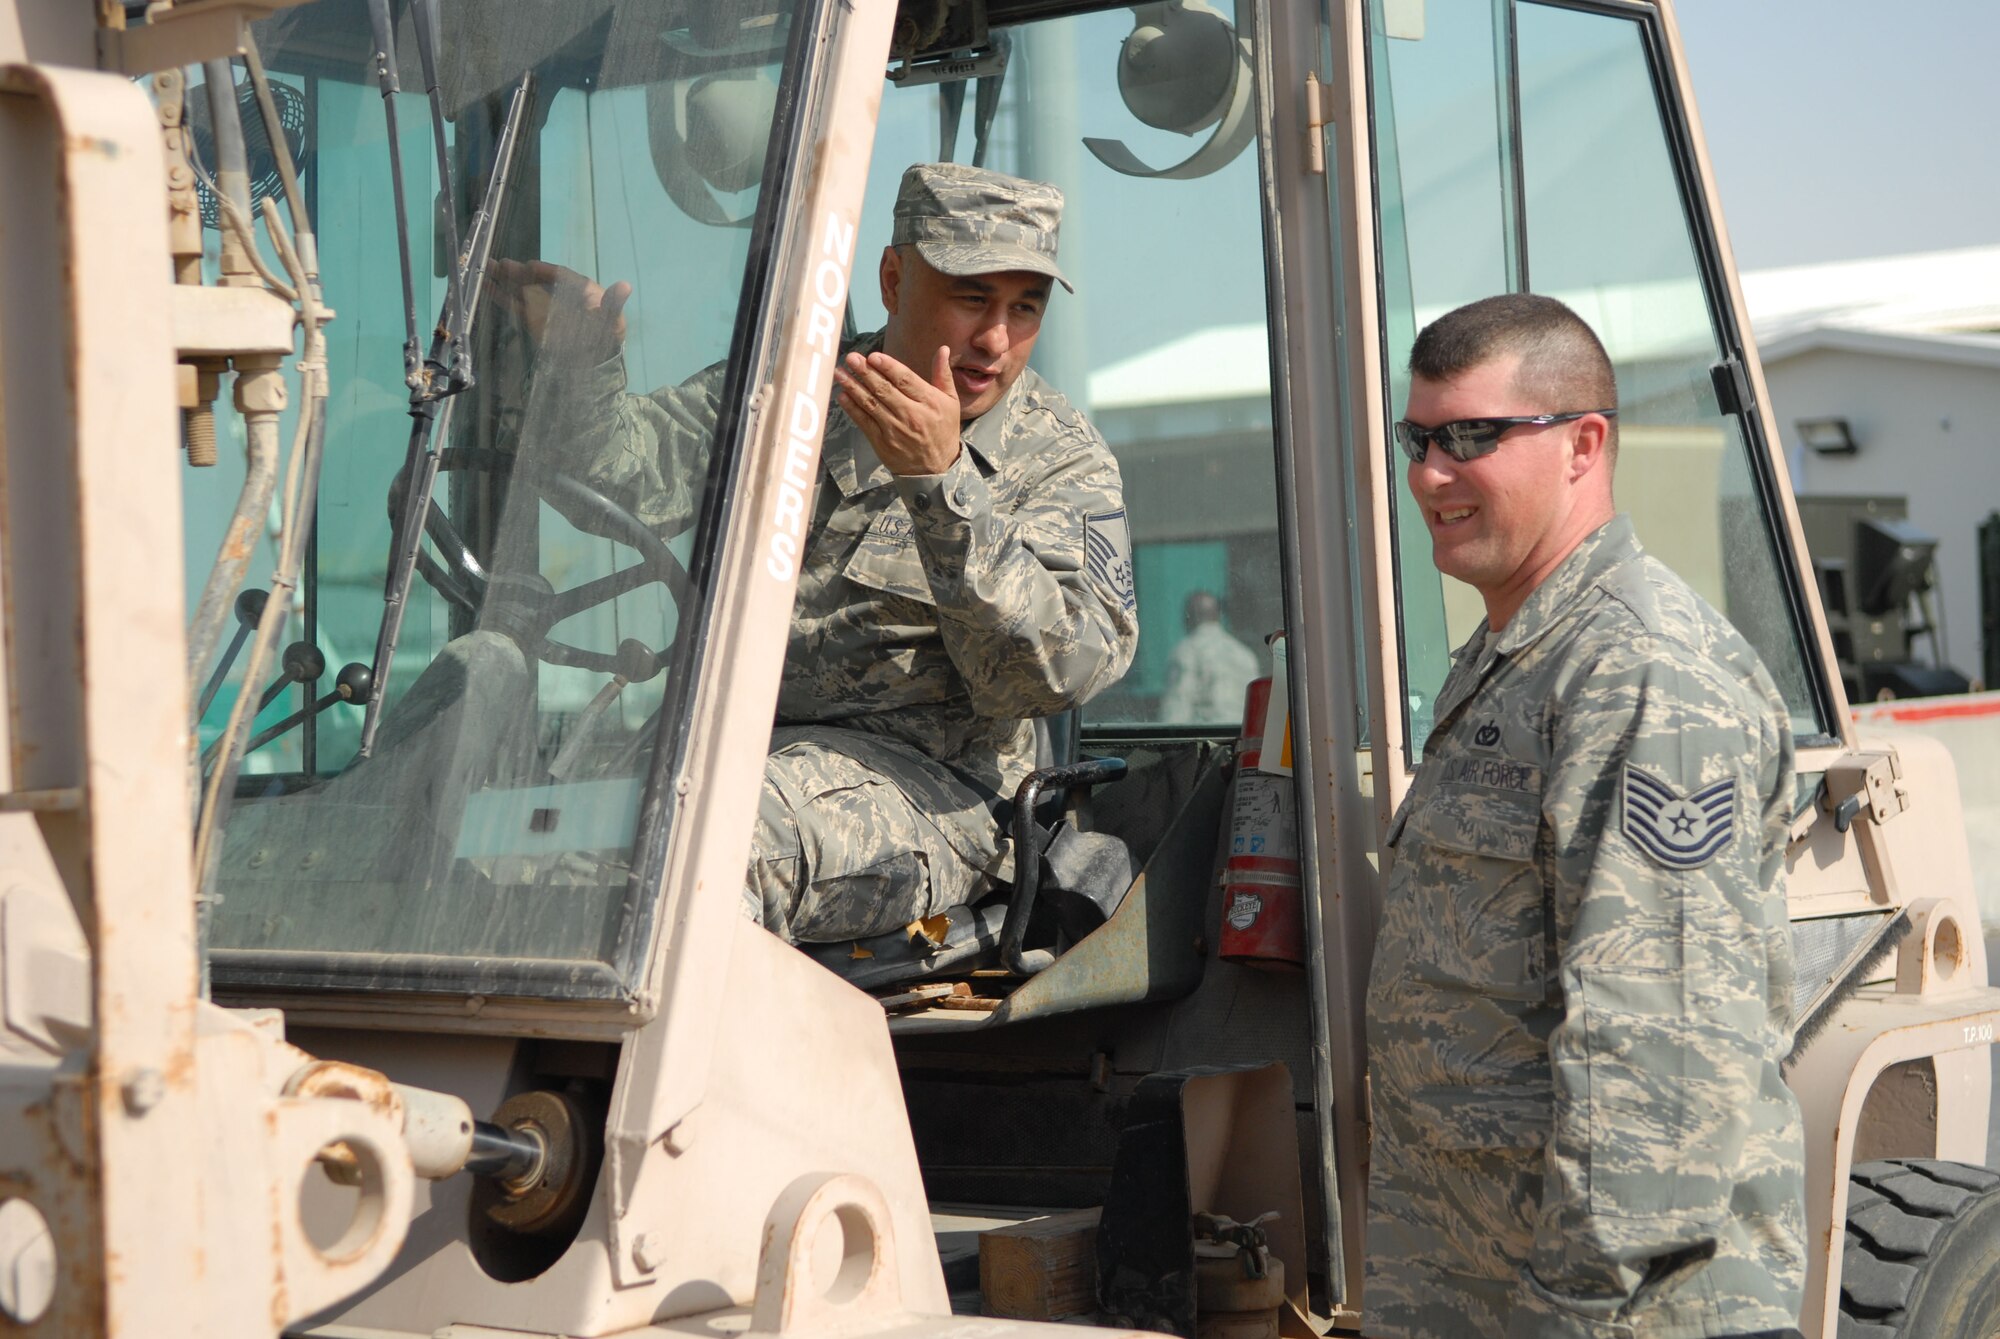 SOUTHWEST ASIA -- Master Sgt. Jose Cerna (left) and Tech. Sgt. Jeffery Montbriand discuss forklift placement of a frequency converter and uninterrupted power source in Hangar 4 here Jan. 10. Sergeant Montbriand, the electrical noncommissioned officer in charge of the operations flight, and Sergeant Cerna, the superintendent of the operations flight, are both with the 380th Expeditionary Civil Engineer Squadron. Although the electrical flight does not usually provide forklift support, both NCOs are qualified forklift drivers allowing them the fexibility to adapt to the needs of the deployed environment. Sergeant Montbriand is a Coventry, Conn., native. Sergeant Cerna hails from Del Rio, Texas. Both are deployed from Andrews Air Force Base, Md. (US Air Force photo by Tech. Sgt. Denise Johnson) (released)